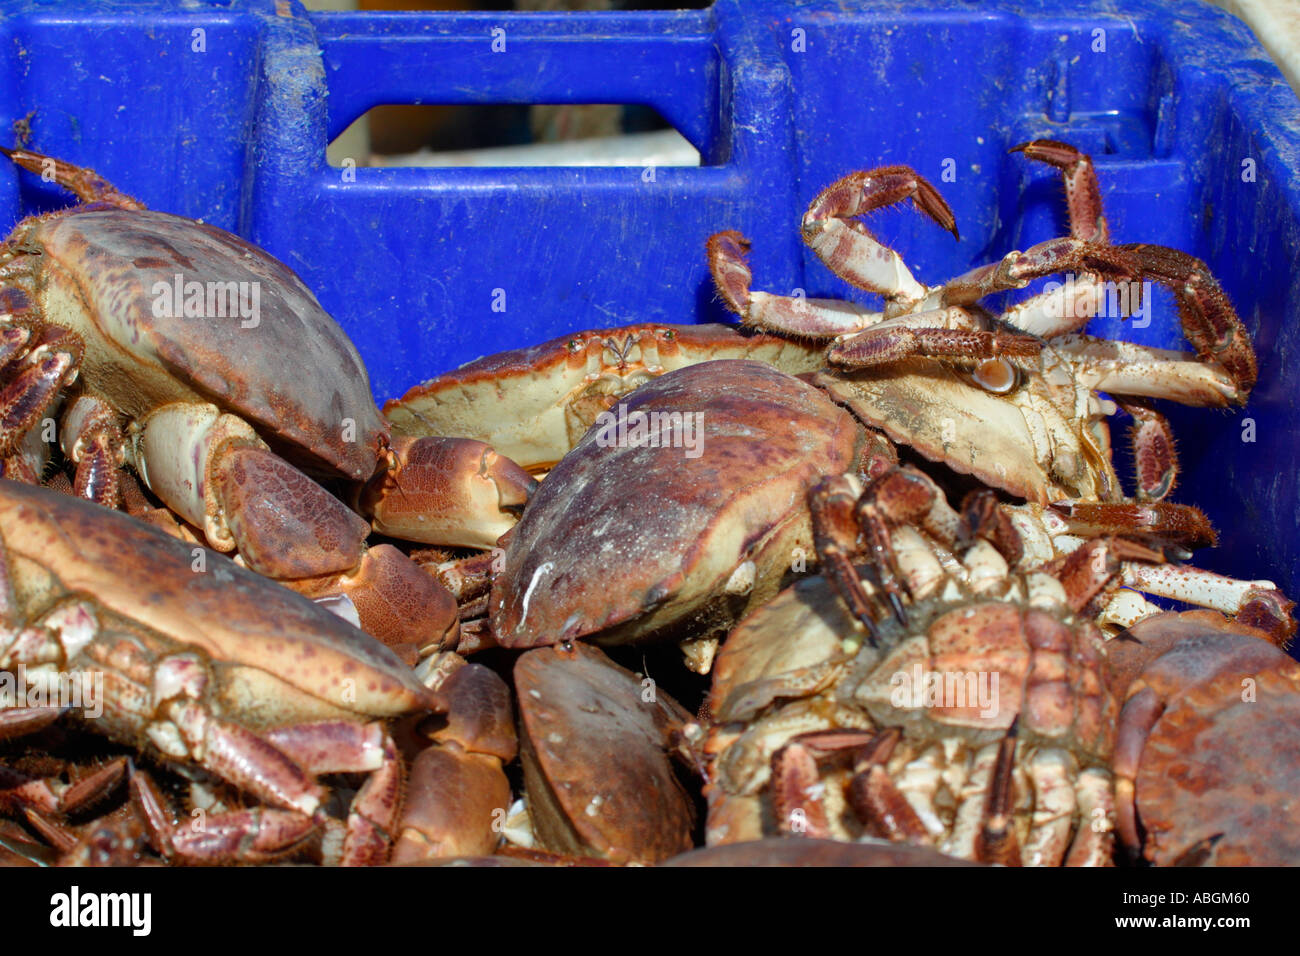 Crabs crab crabmeat freshly caught seafood sea food outdoors in sunshine Kilmore harbour County Wexford Ireland Europe EU Stock Photo